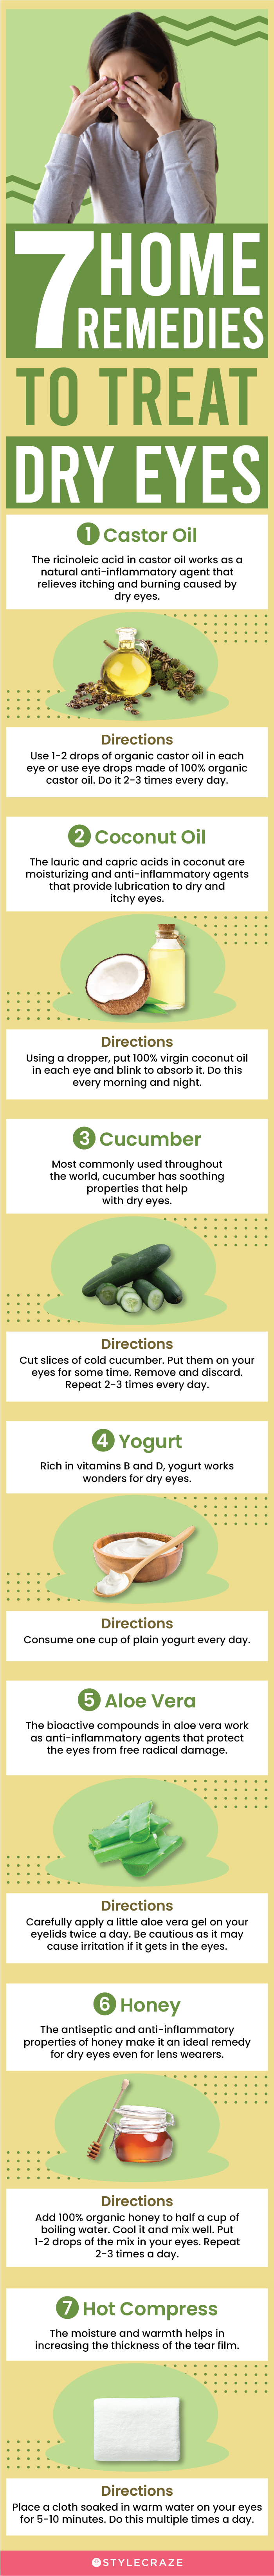 7 home remedies to treat dry eyes (infographic)